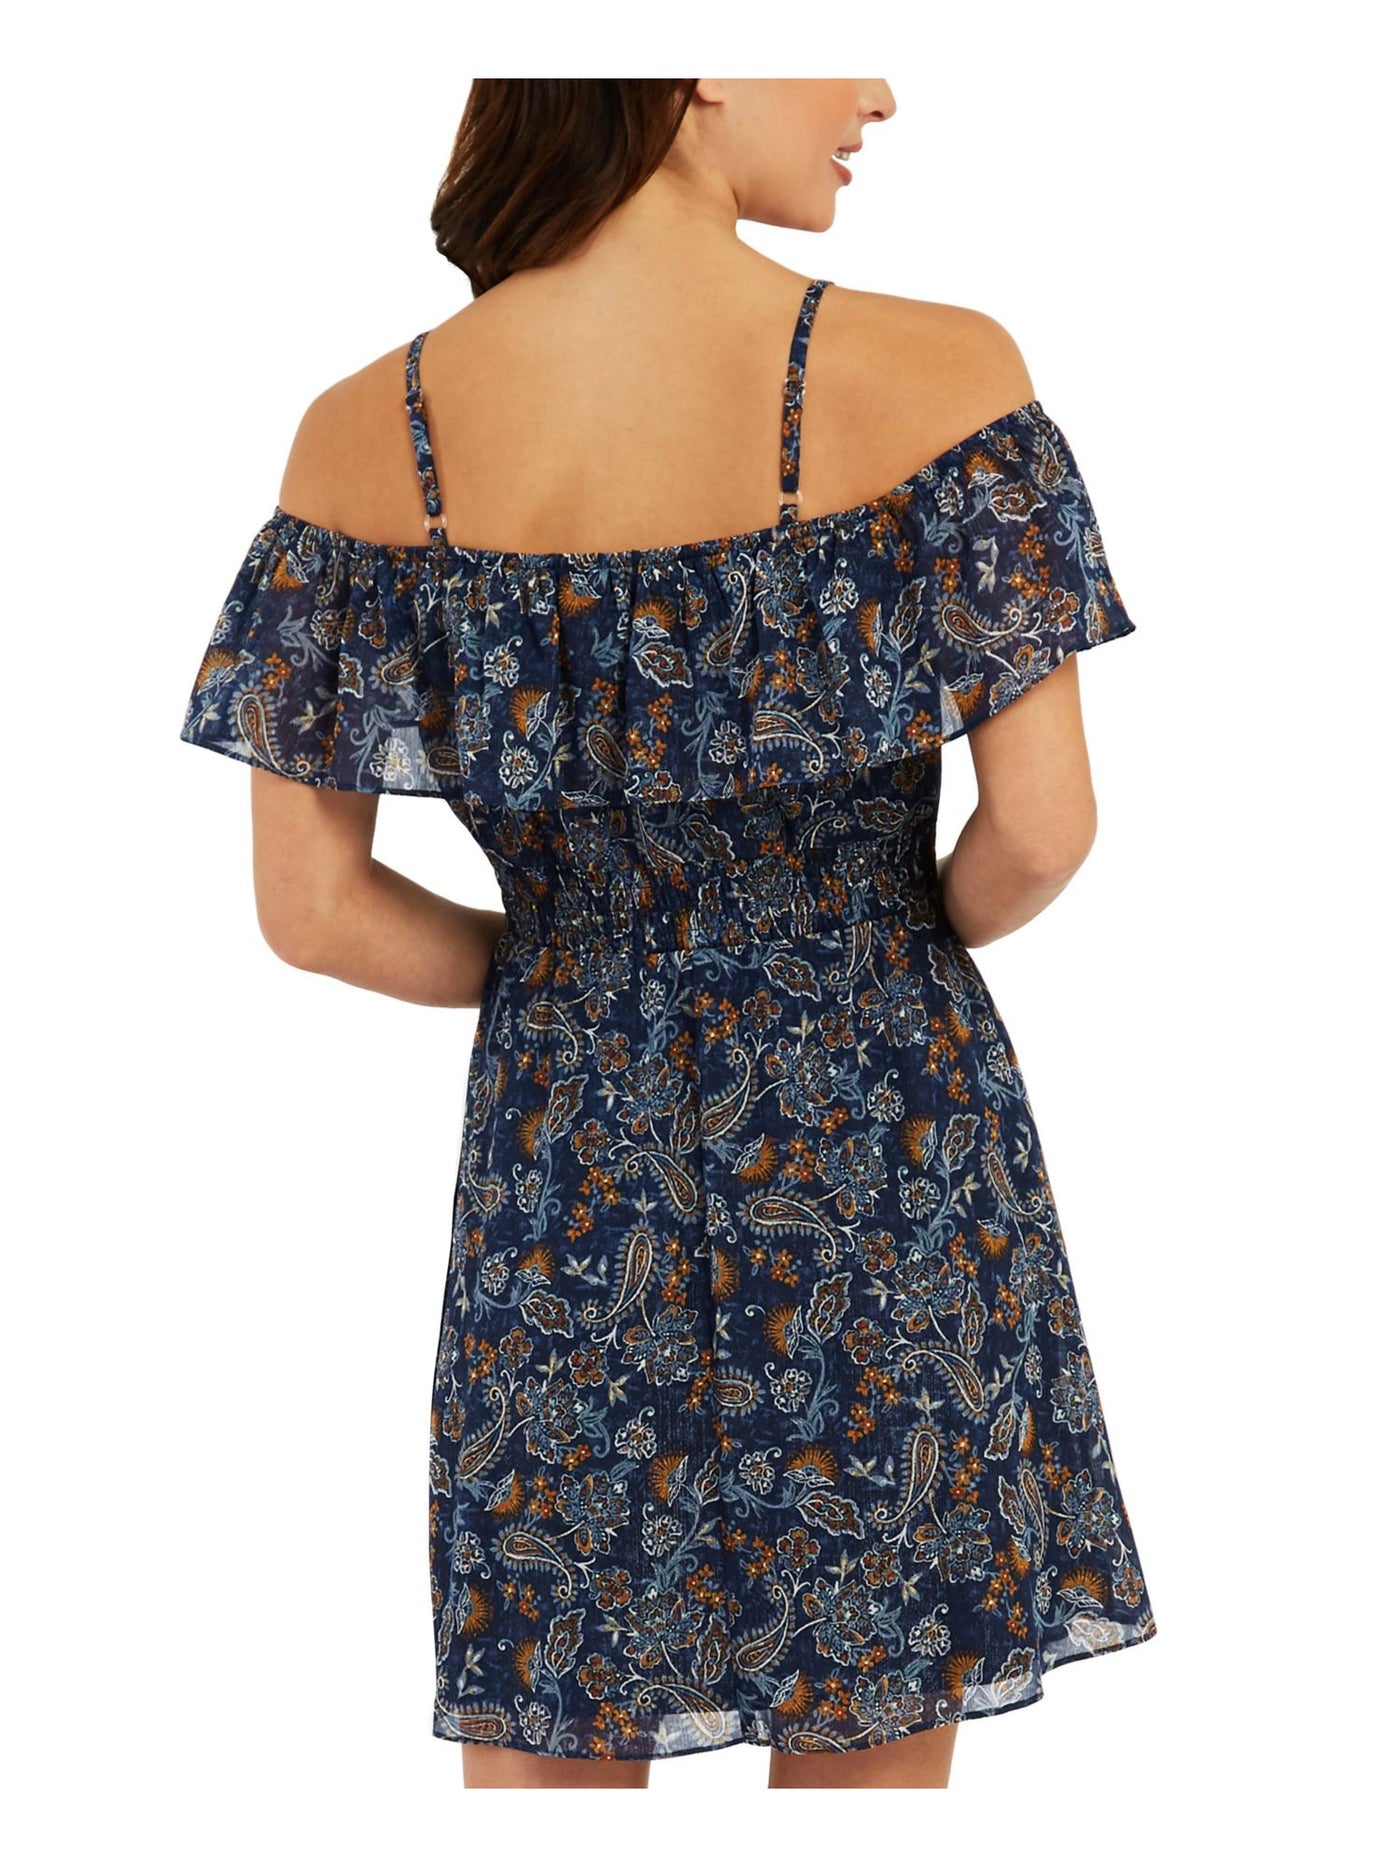 BCX DRESS Womens Navy Smocked Adjustable Sheer Lined Paisley Spaghetti Strap Off Shoulder Above The Knee Fit + Flare Dress XL